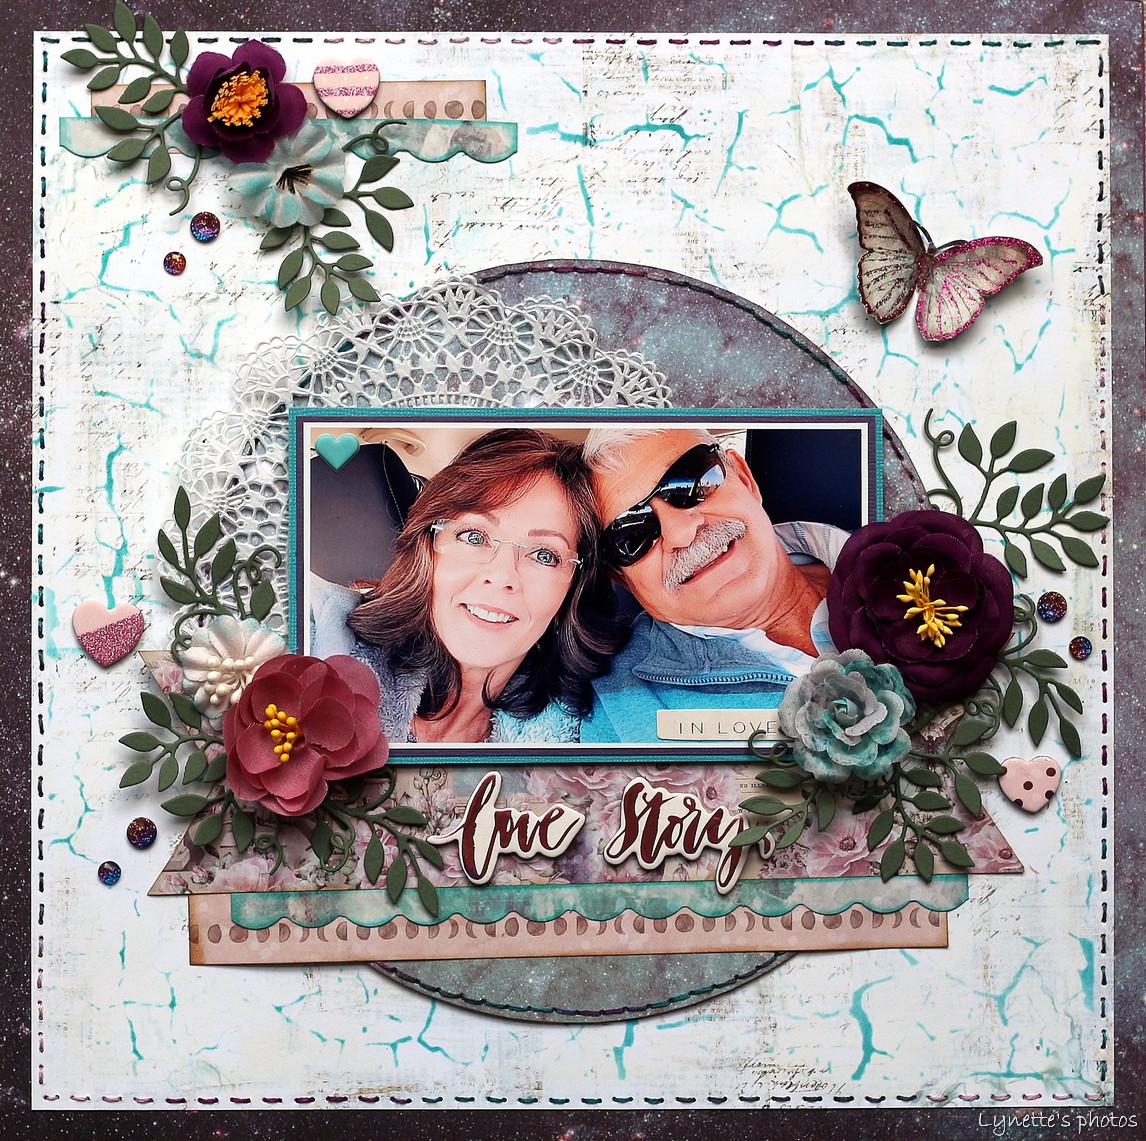 Scrappin' Goodtime - New!! New!! Bearly Art Glue! First scrapbook